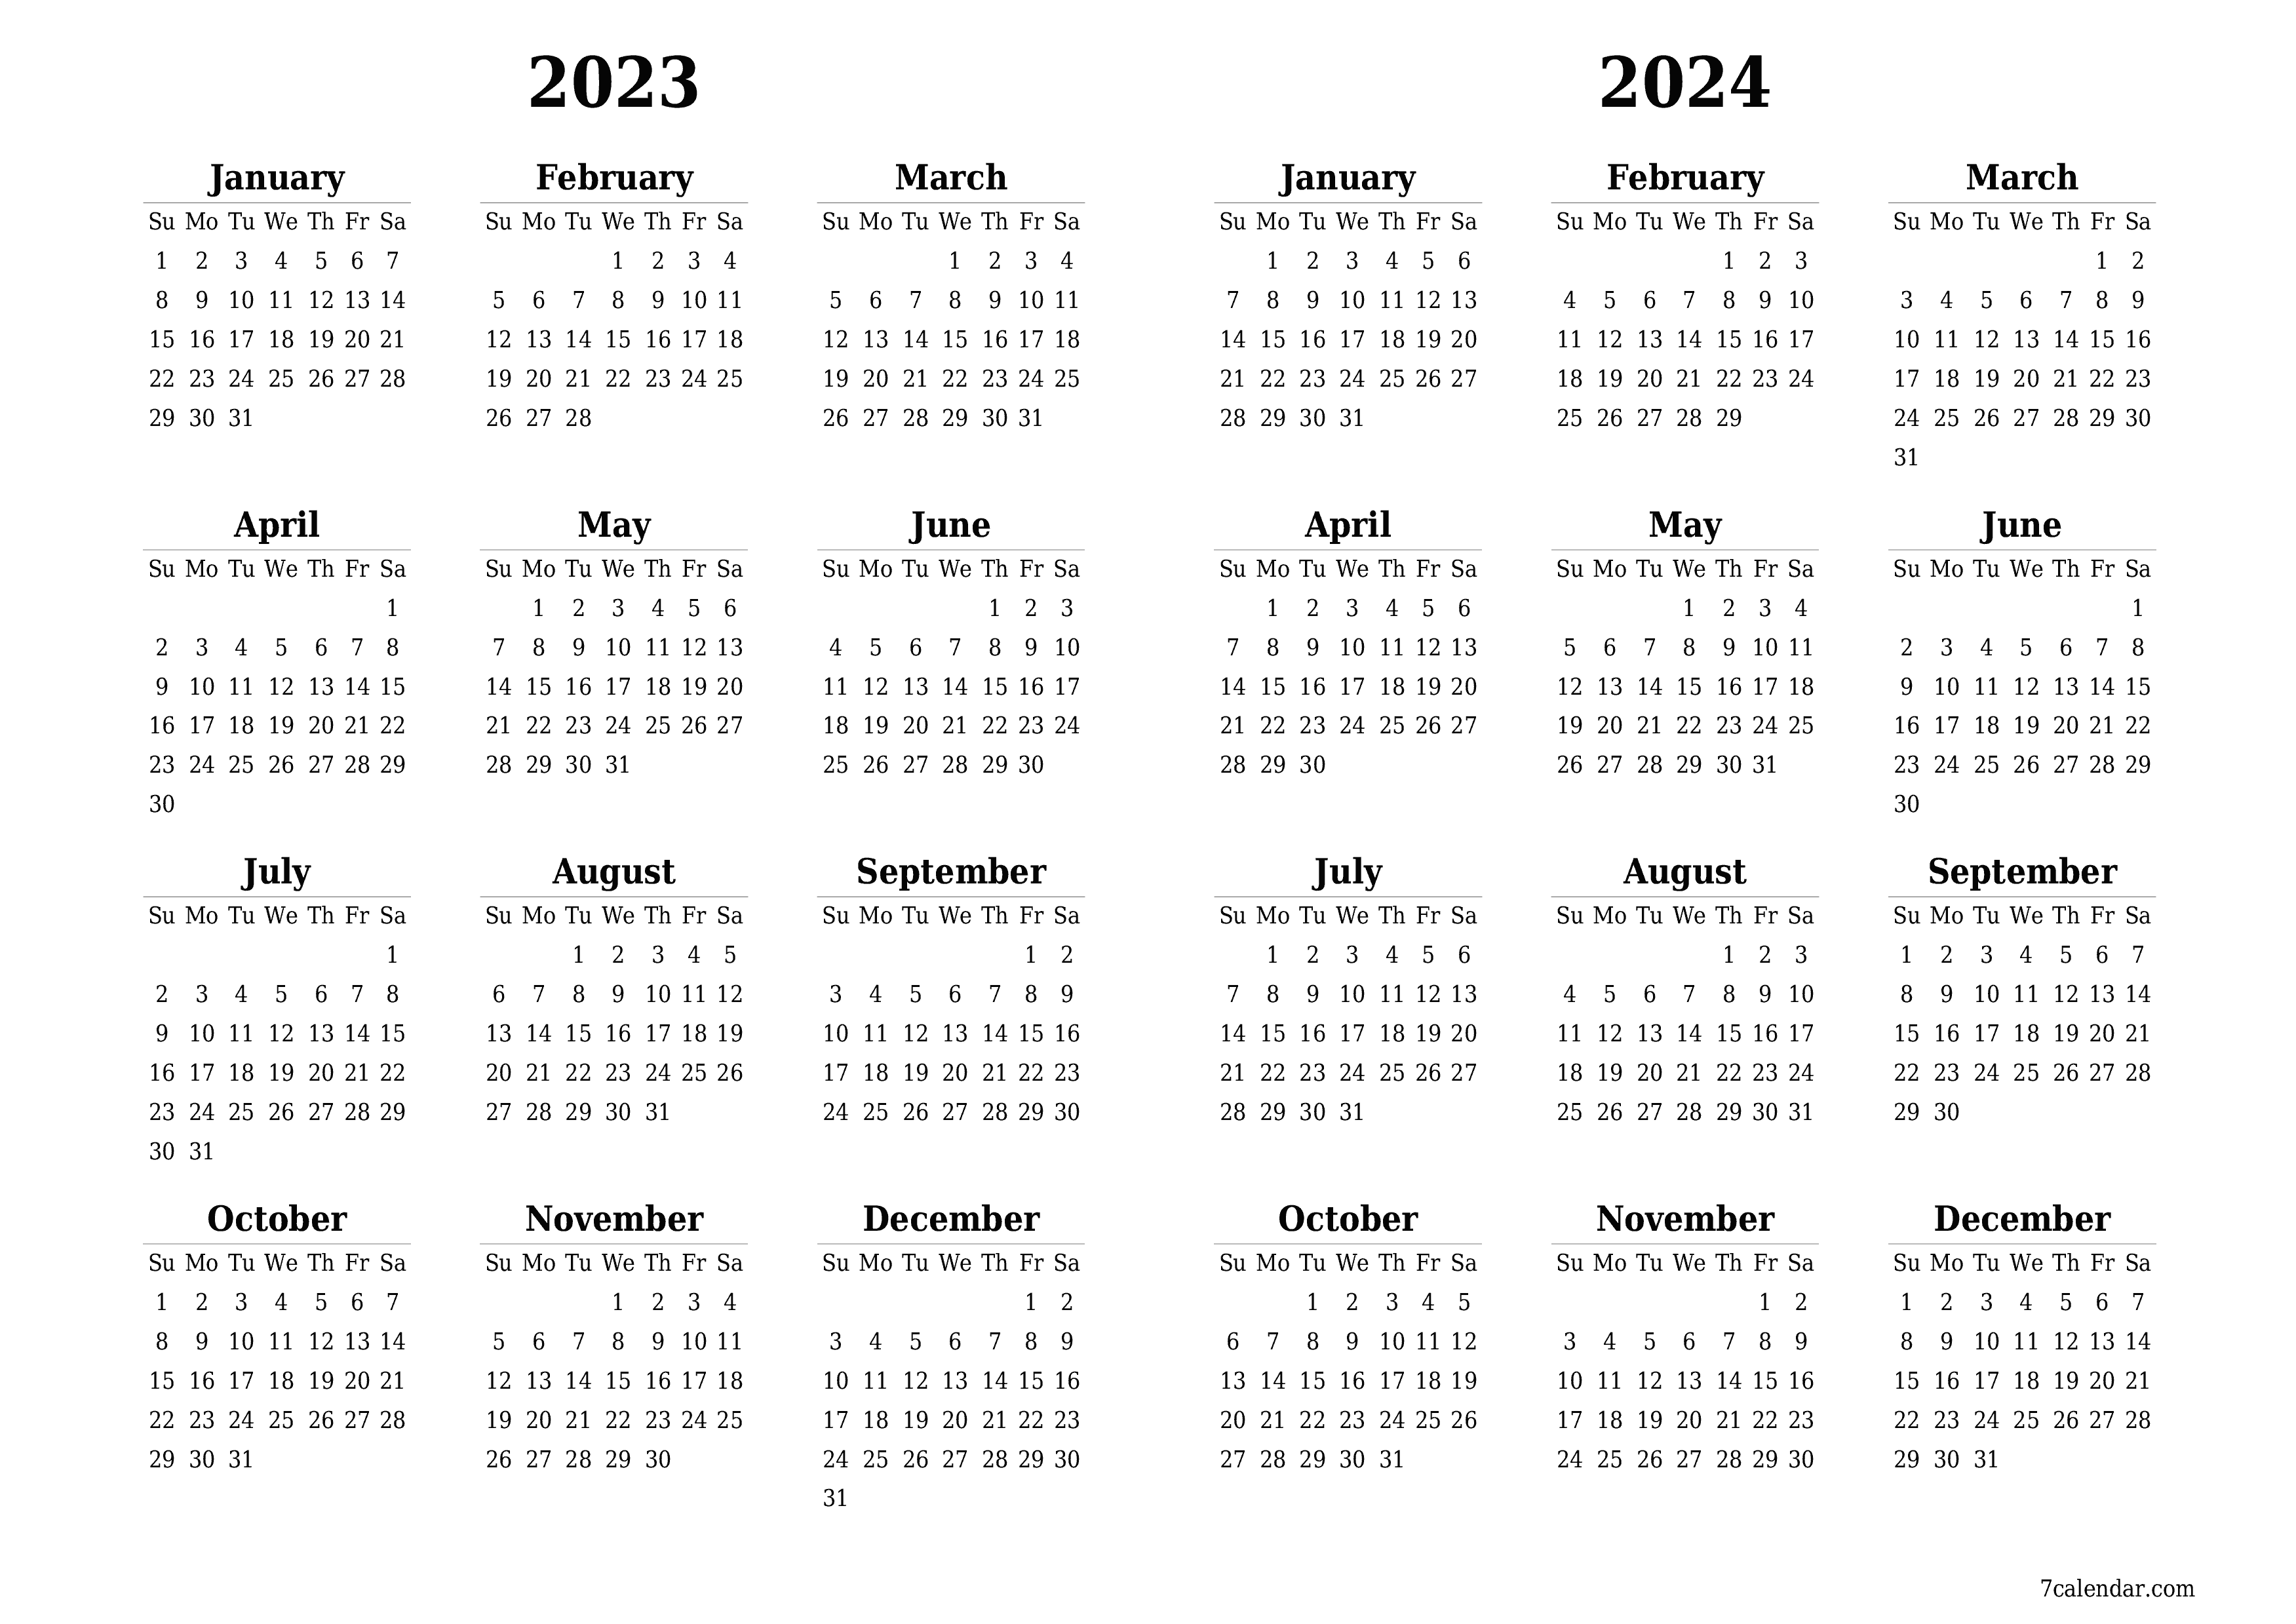 Blank yearly printable calendar and planner for the year 2023, 2024 with notes, save and print to PDF PNG English - 7calendar.com